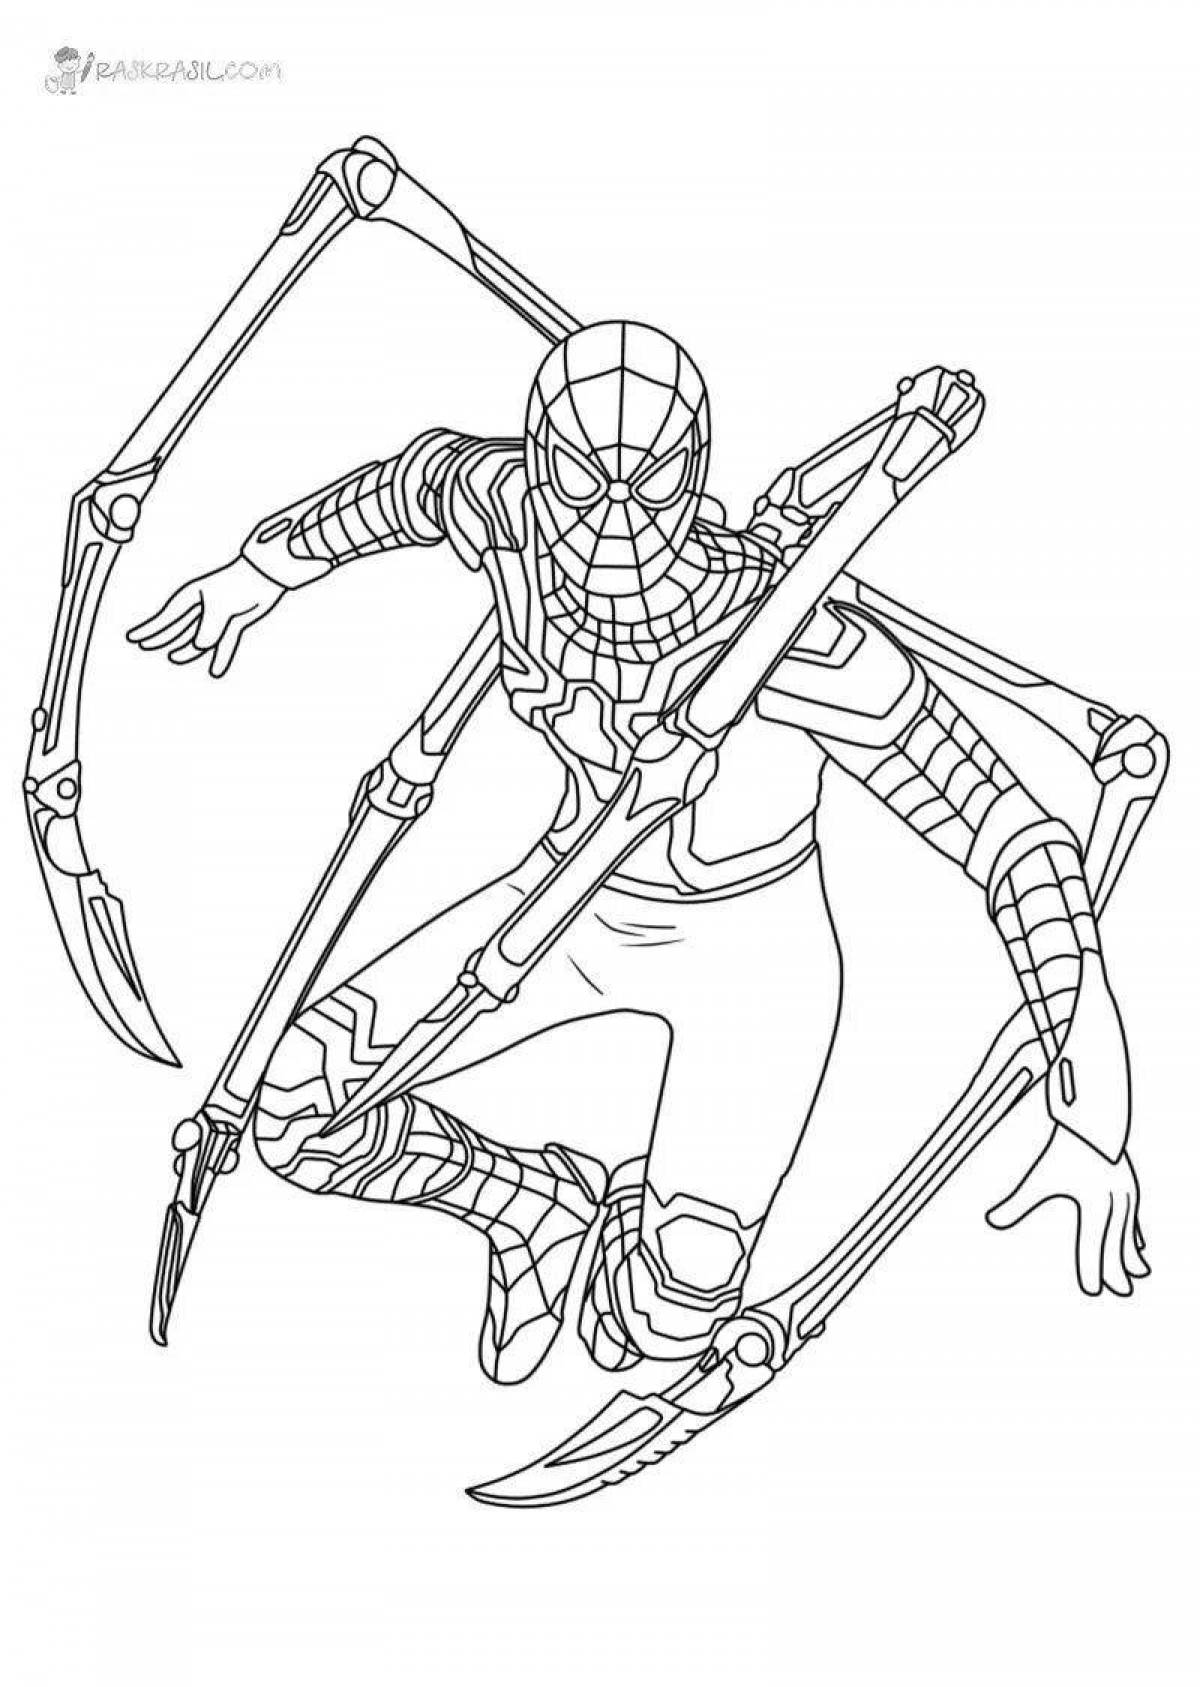 Exquisite iron spider coloring page